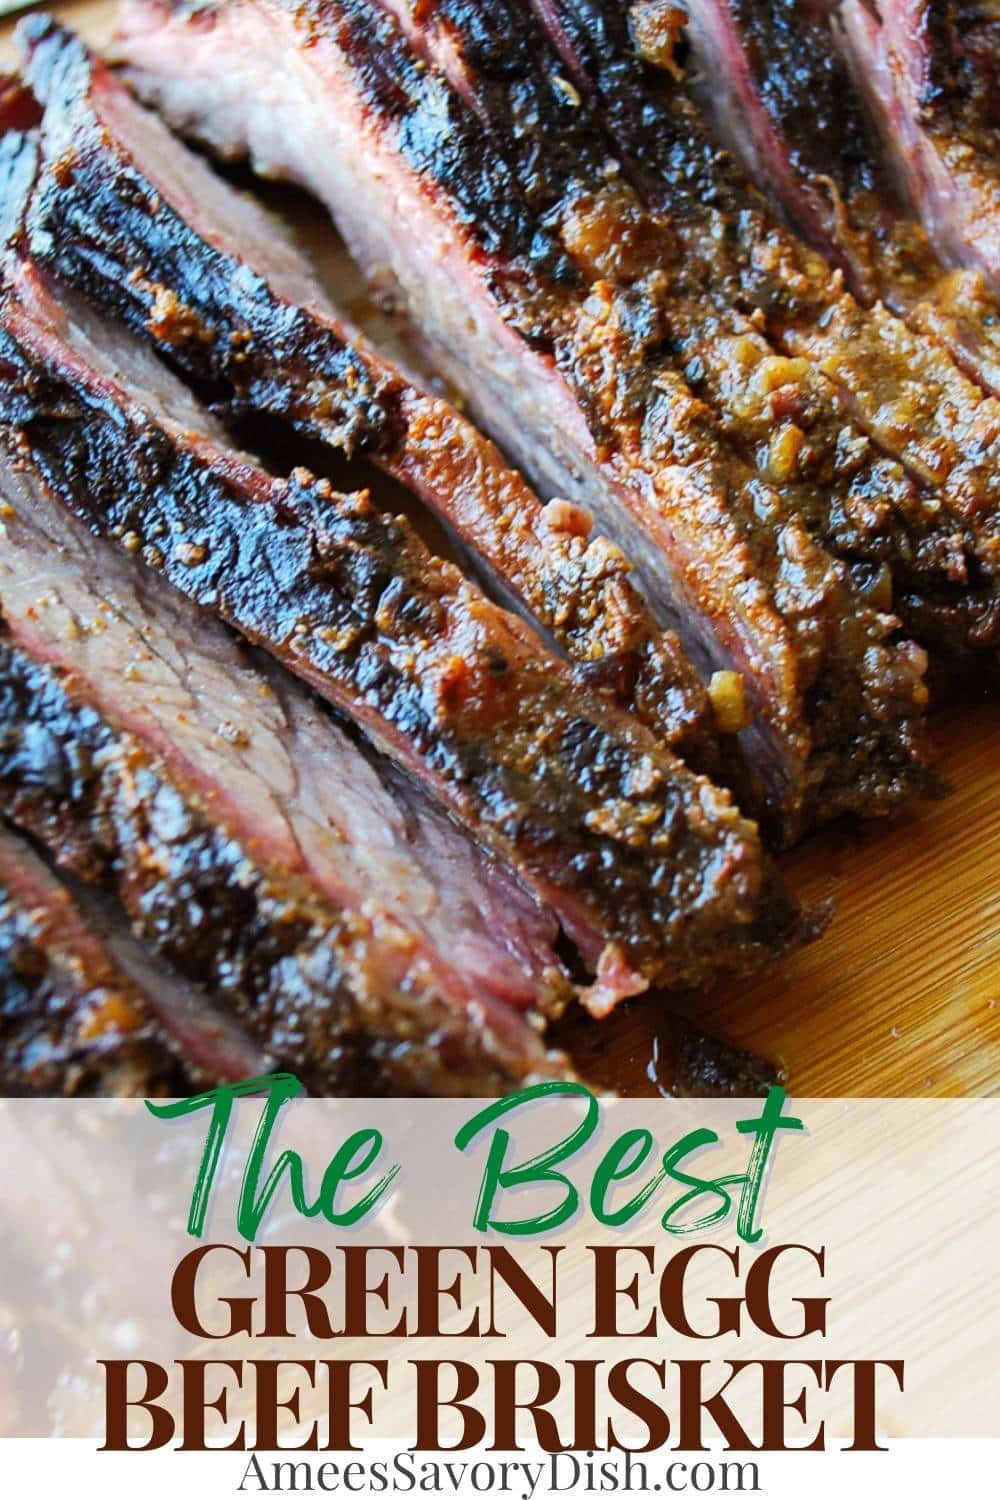 A simple and mouthwatering recipe for a smoked beef brisket using a homemade barbecue rub made in a Big Green Egg smoker.   via @Ameessavorydish